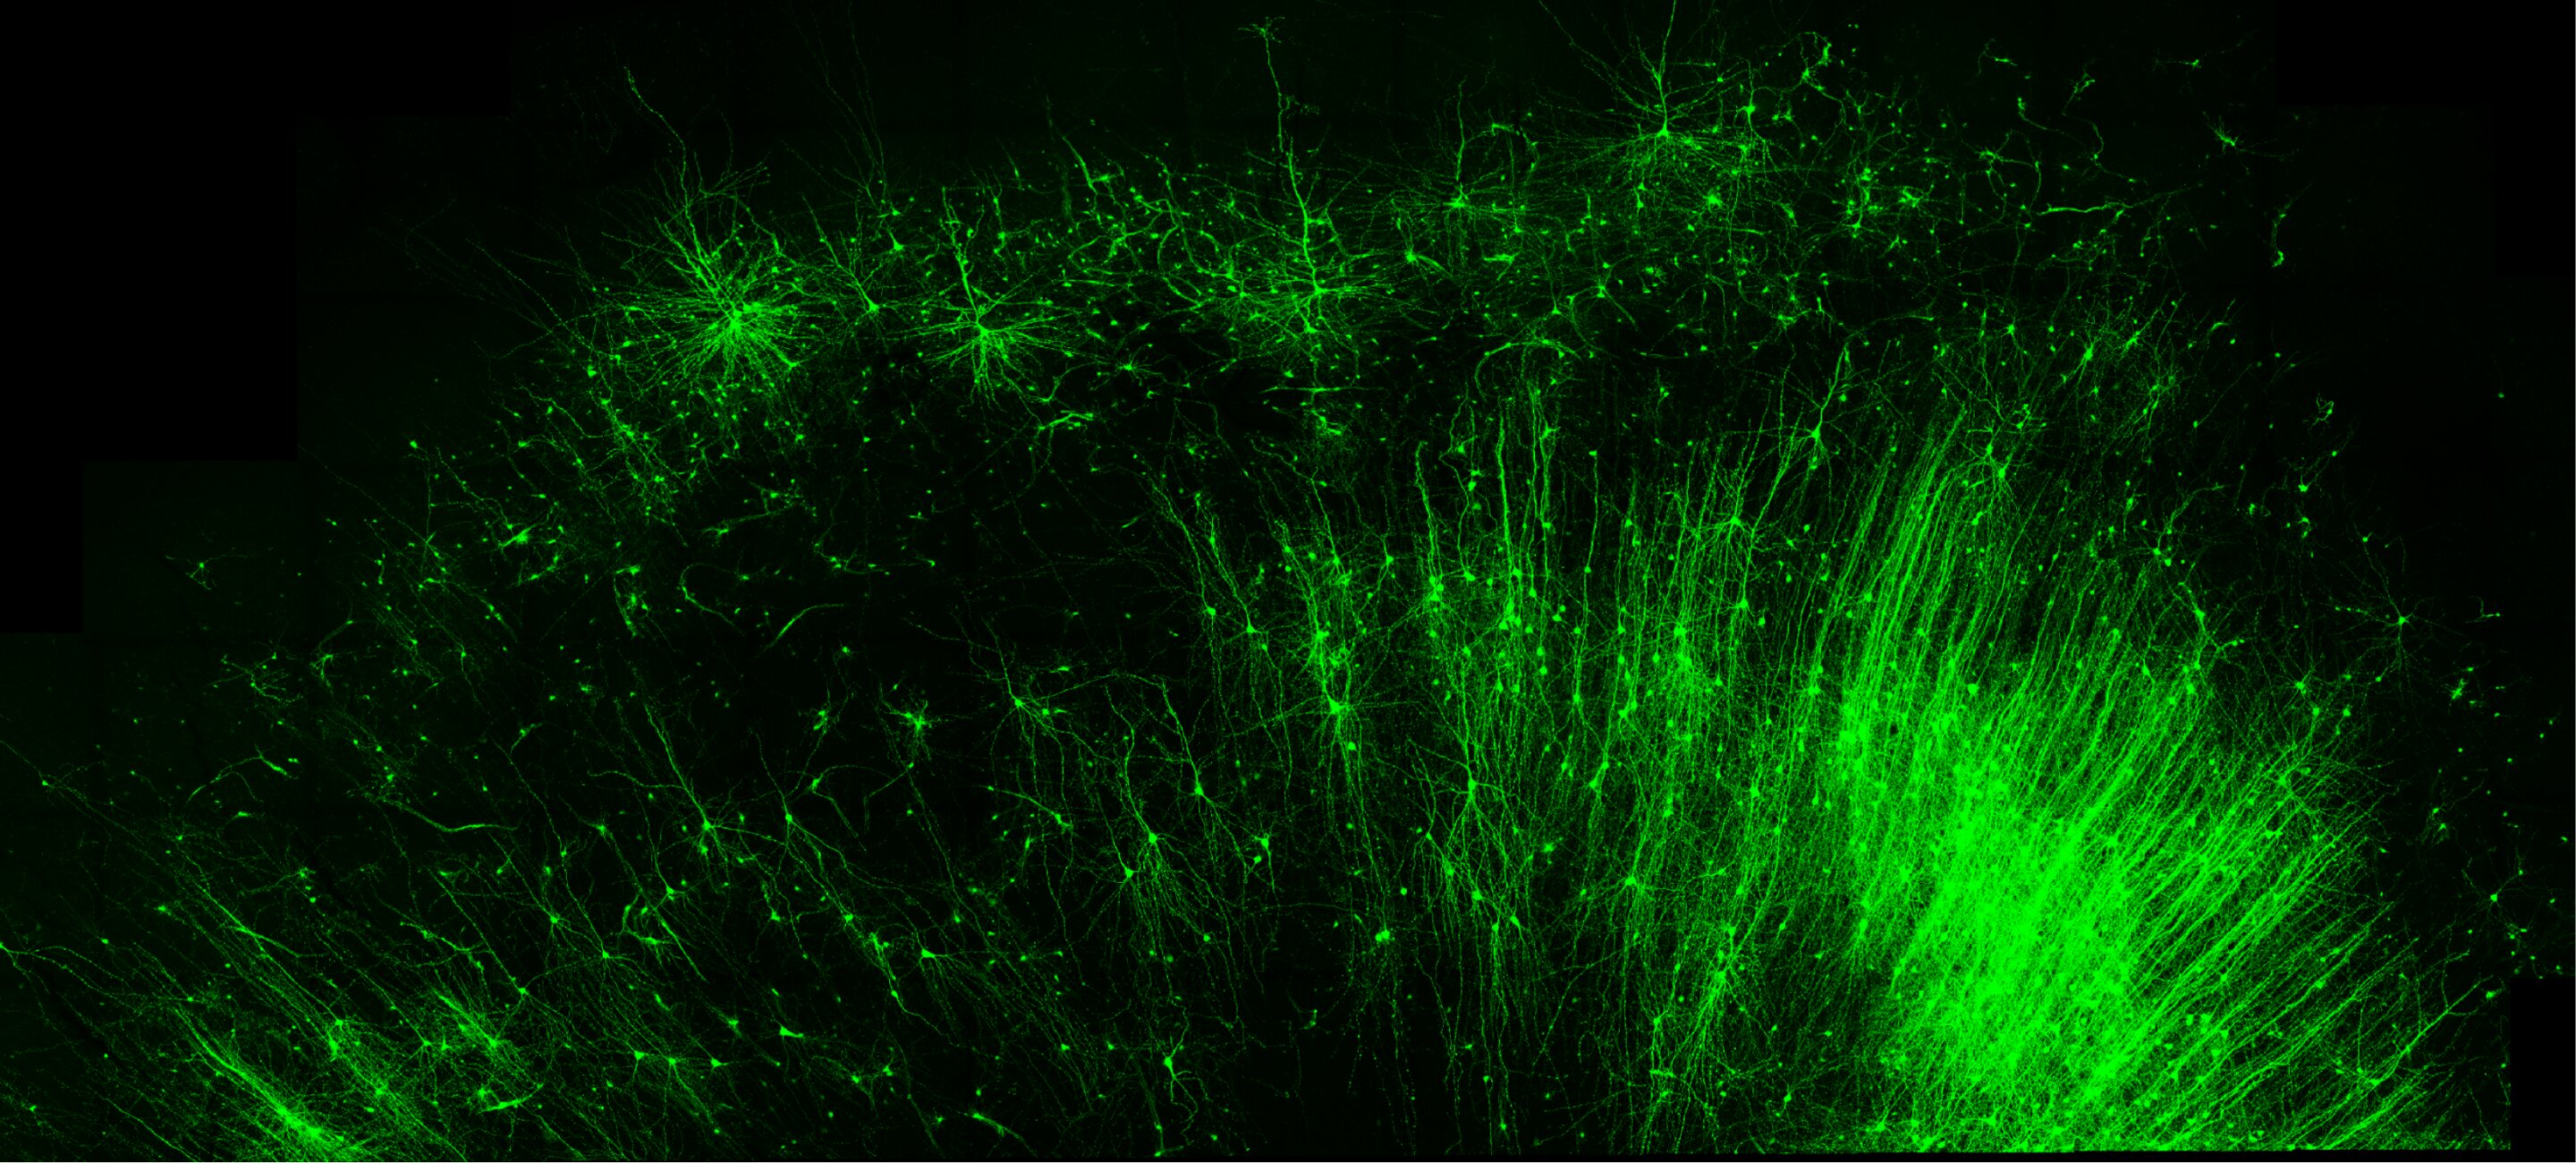 New RNA-based tool can illuminate brain circuits, edit specific cells